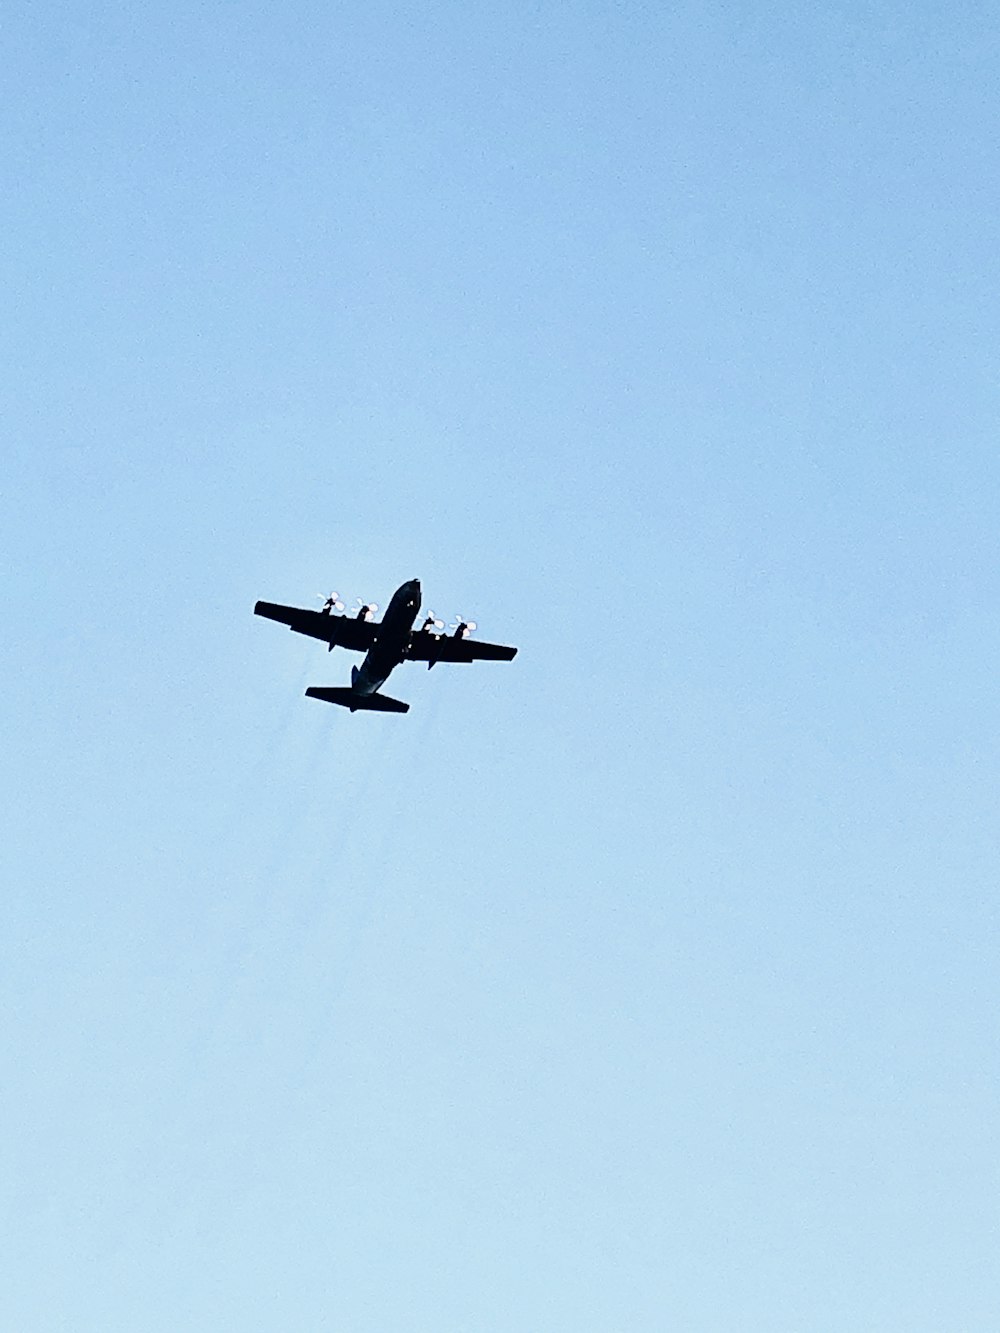 black airplane in mid air during daytime